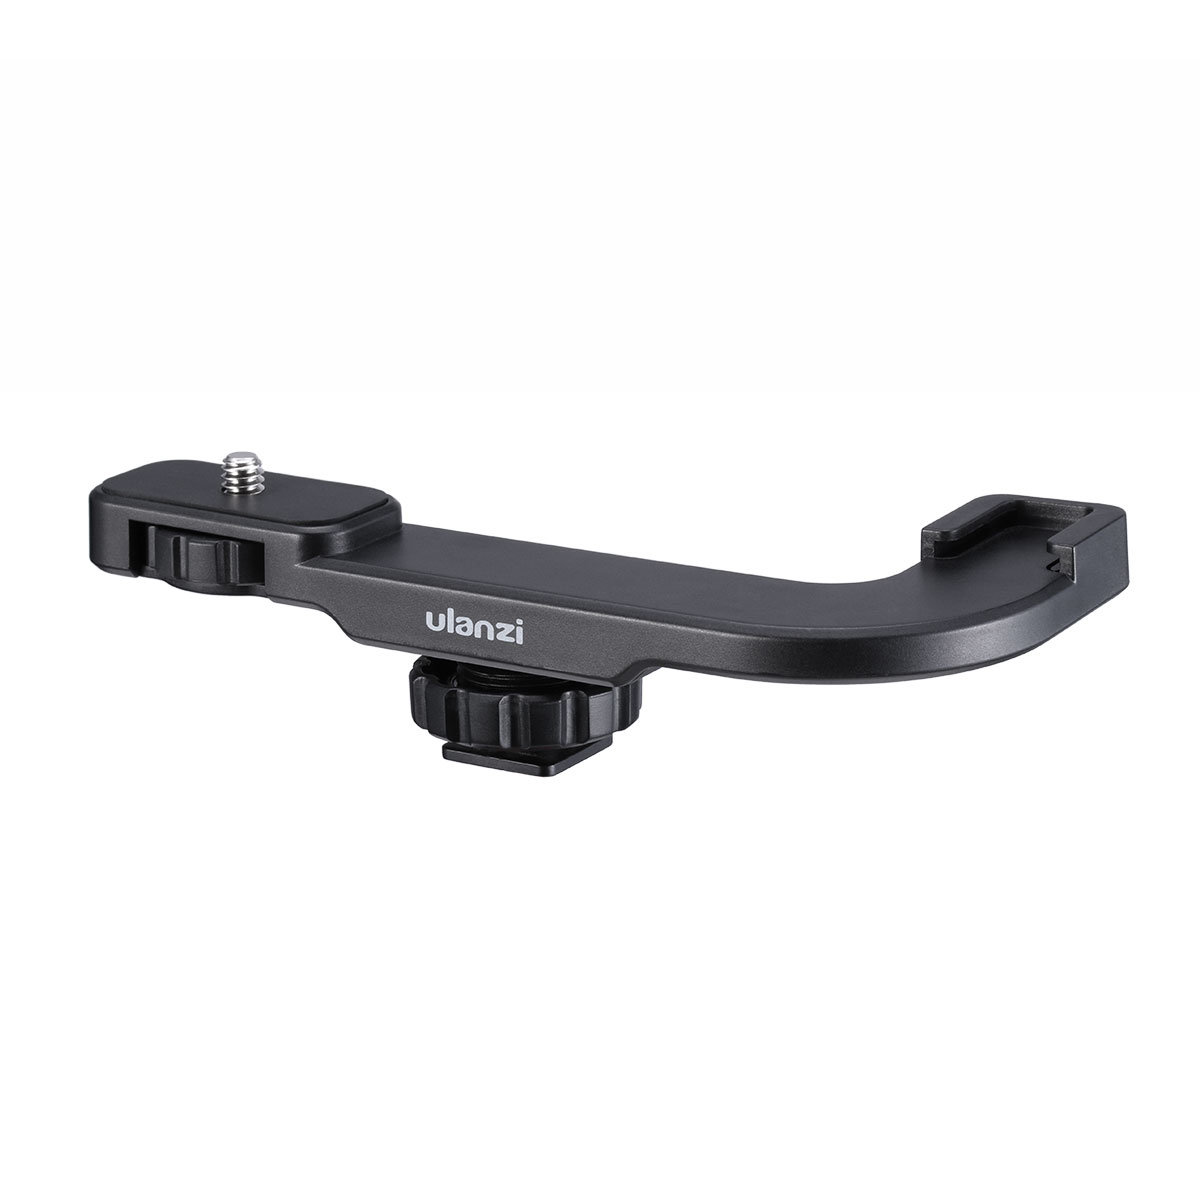 

Ulanzi PT-8 Cold Shoe Camera Mount Bracket ABS Material with Cold Shoe Interface for Microphone LED Video Light